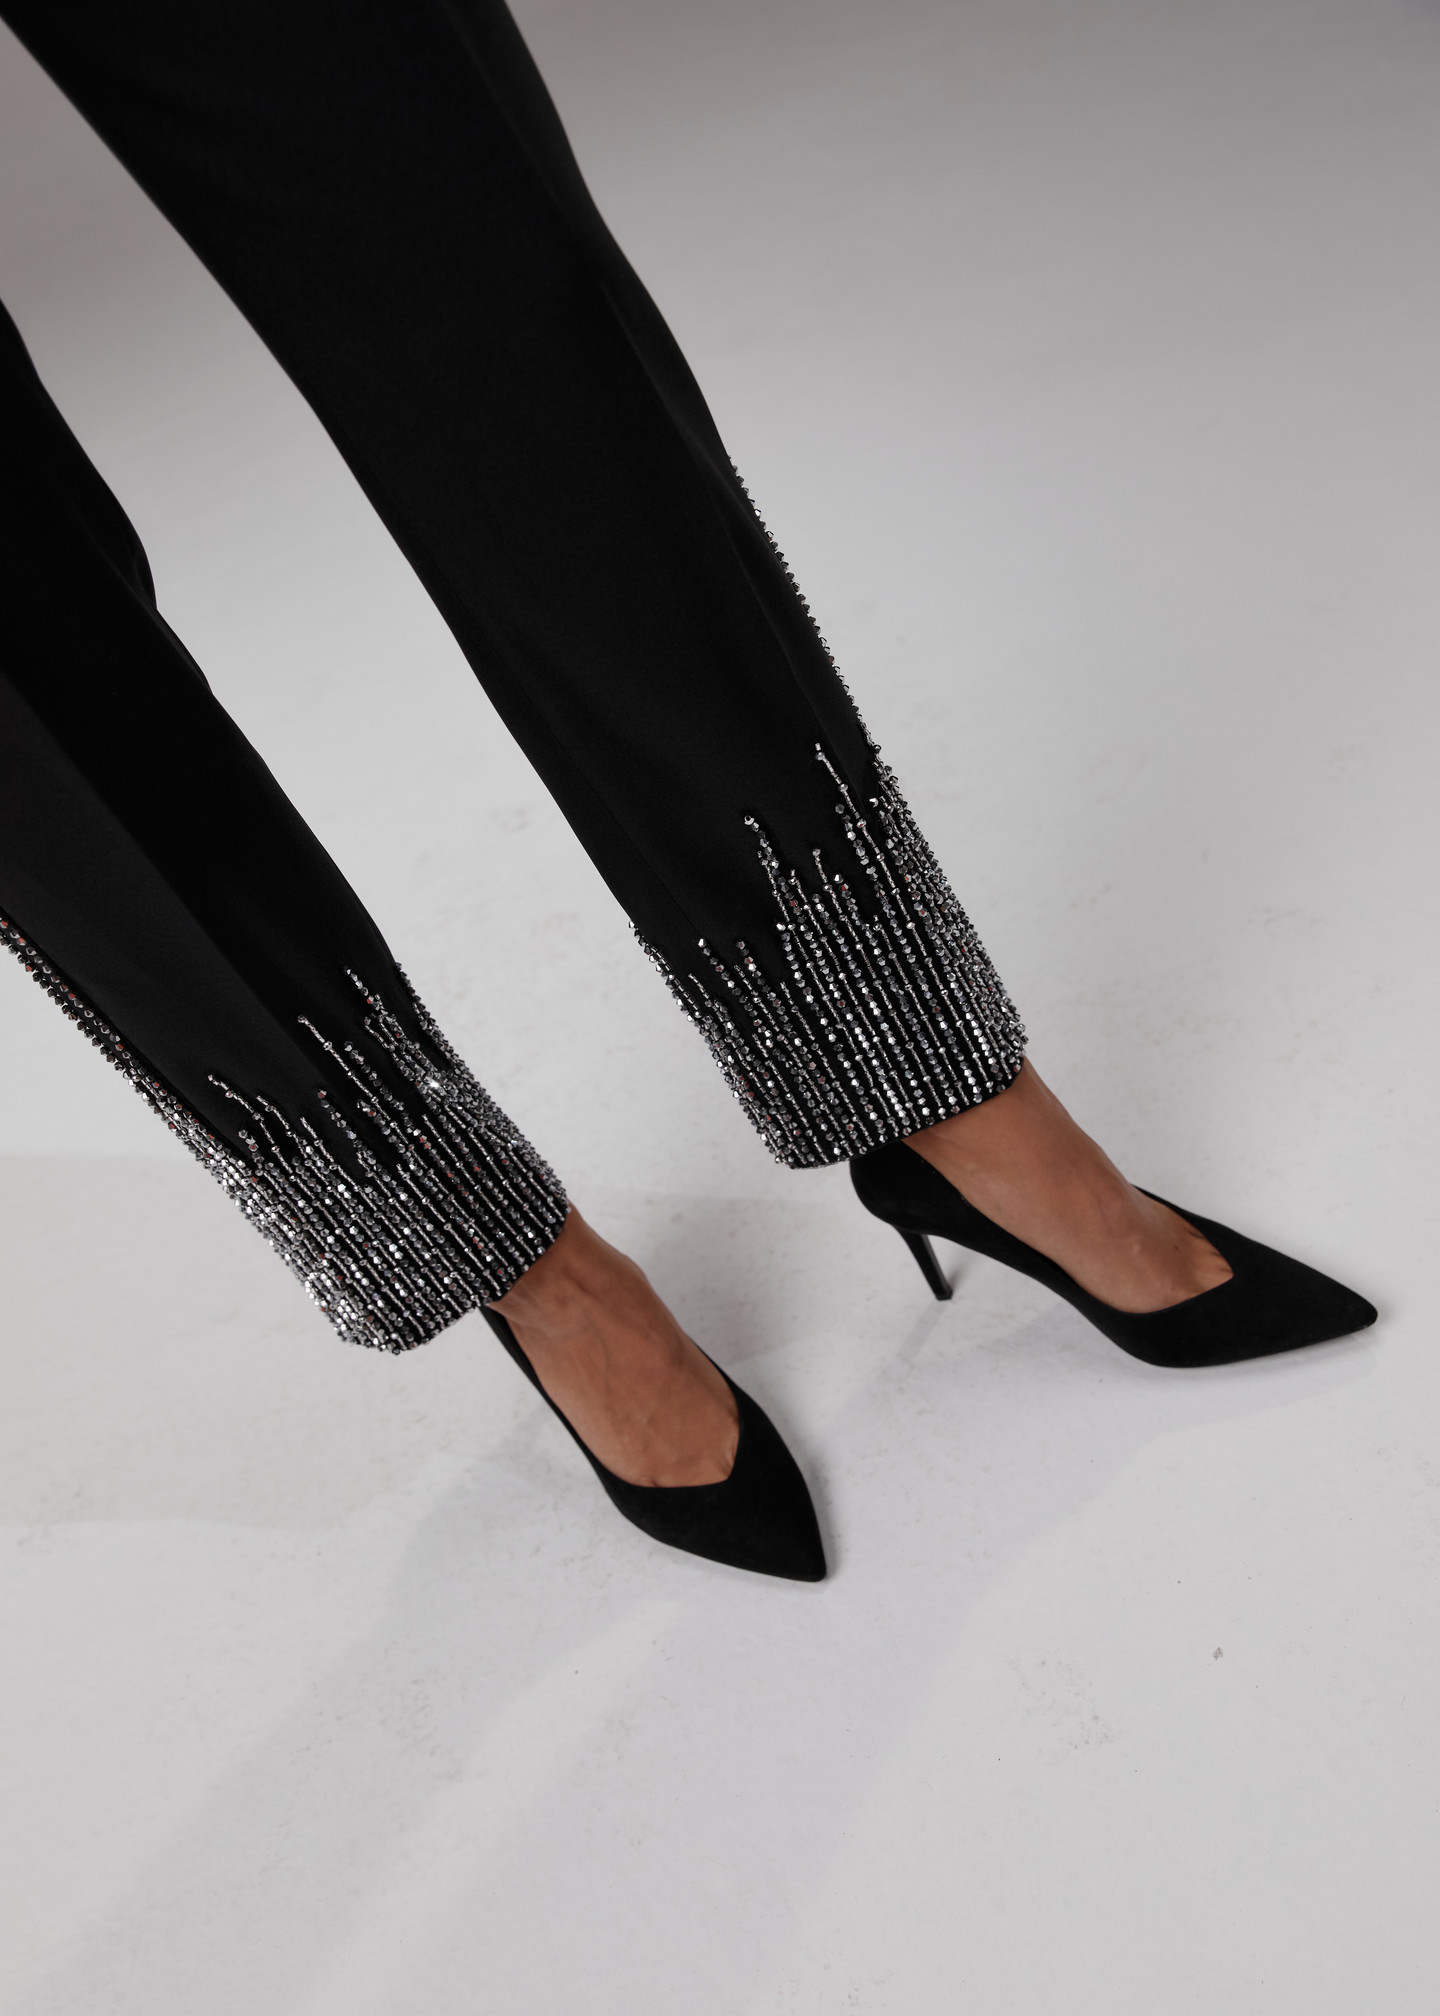 Beaded trousers, 2023, couture, trousers, evening, black, black suit beaded with silver, embroidery, silver color